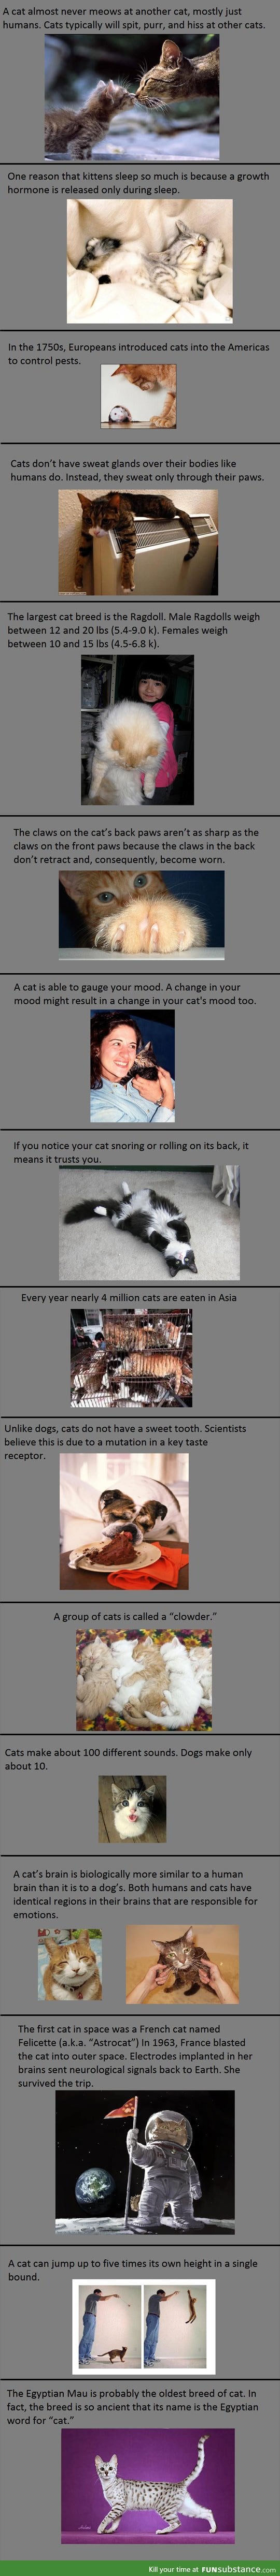 Here, have some facts about your cats.